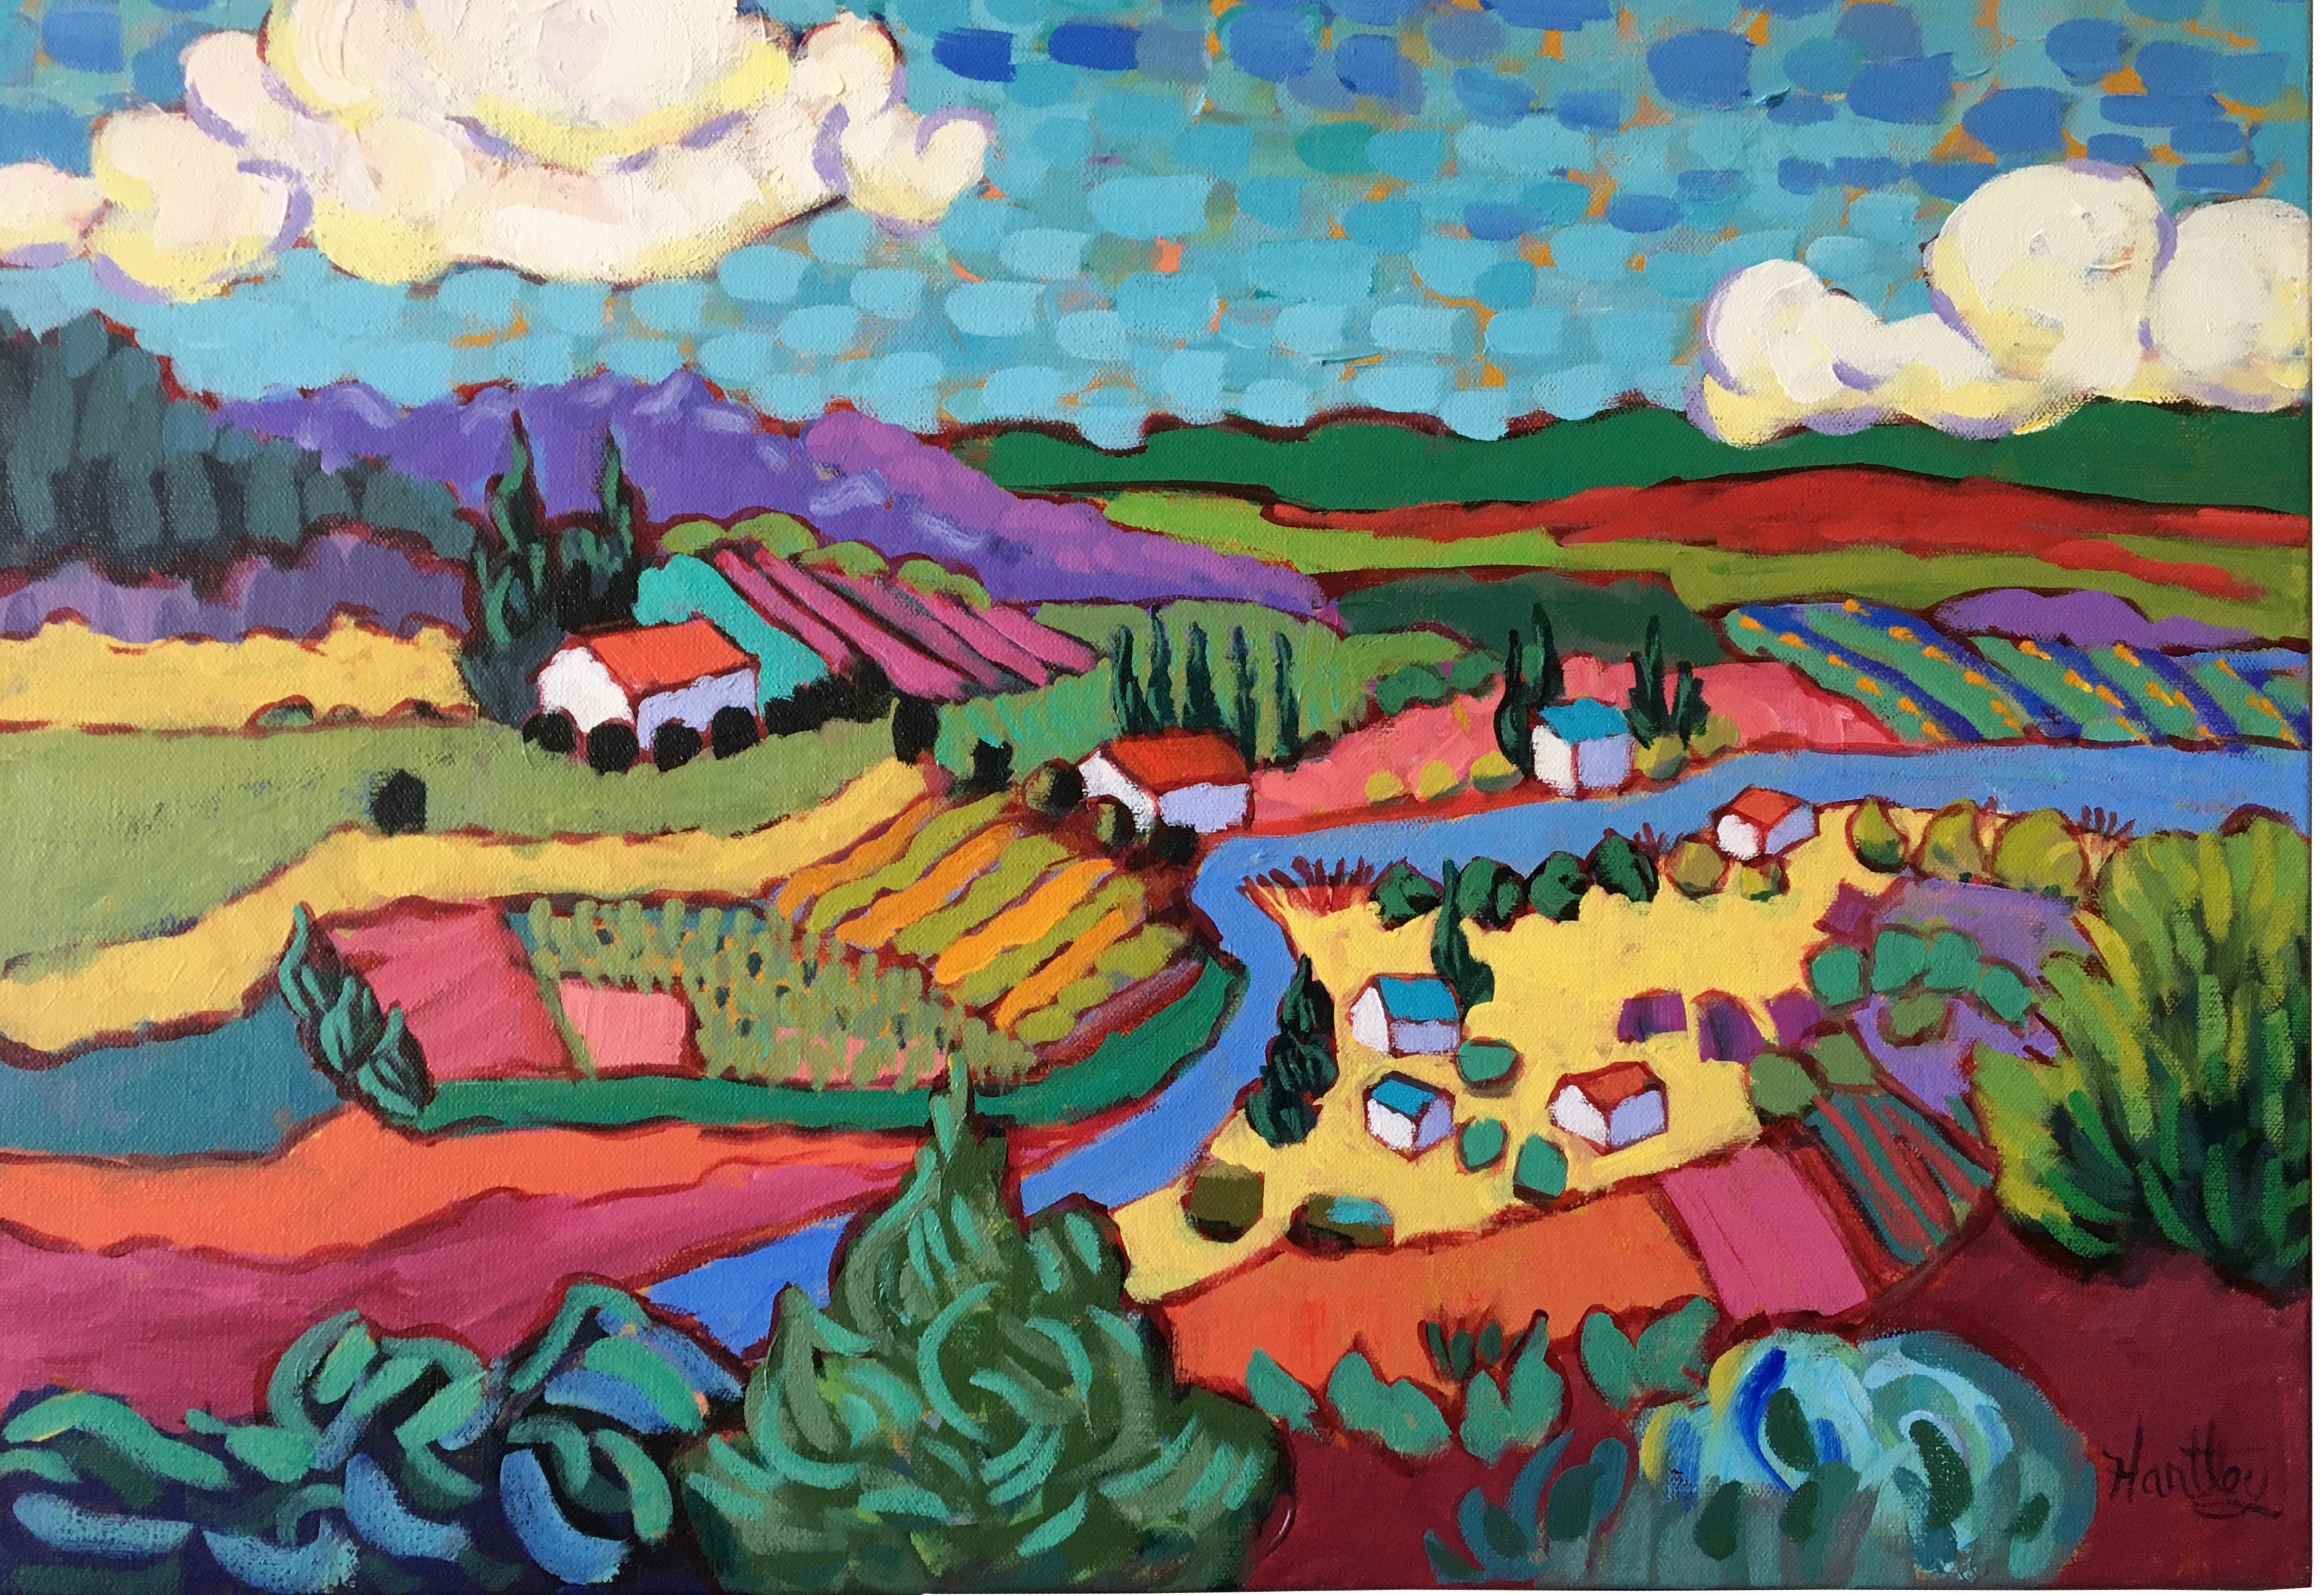 Claudia Hartley Landscape Painting - "Looking Down on the Valley"